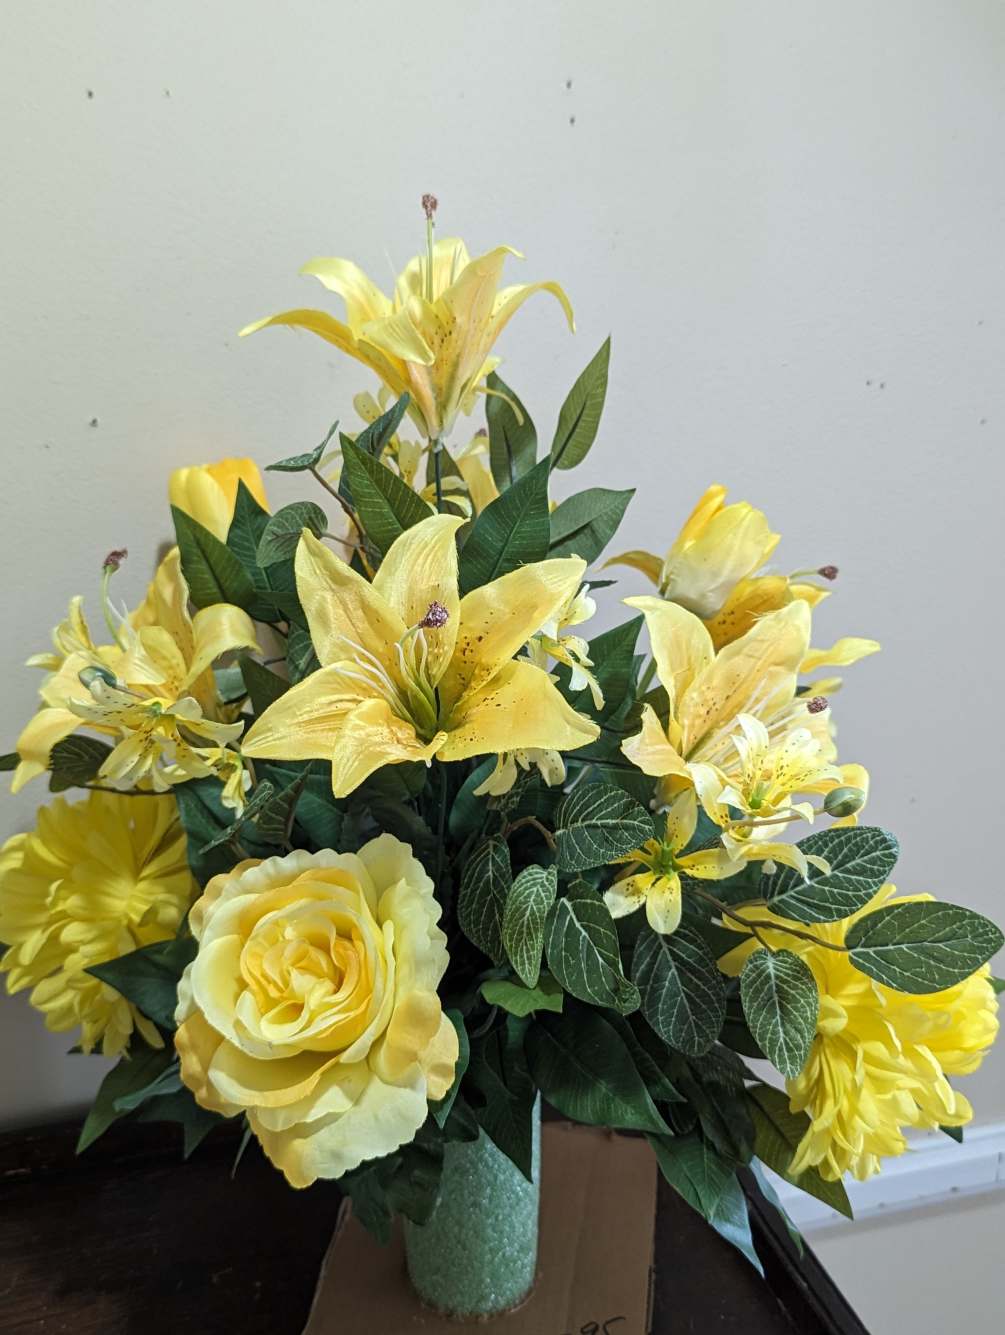 This silk flower arrangement is made of yellow colored flowers complimented by